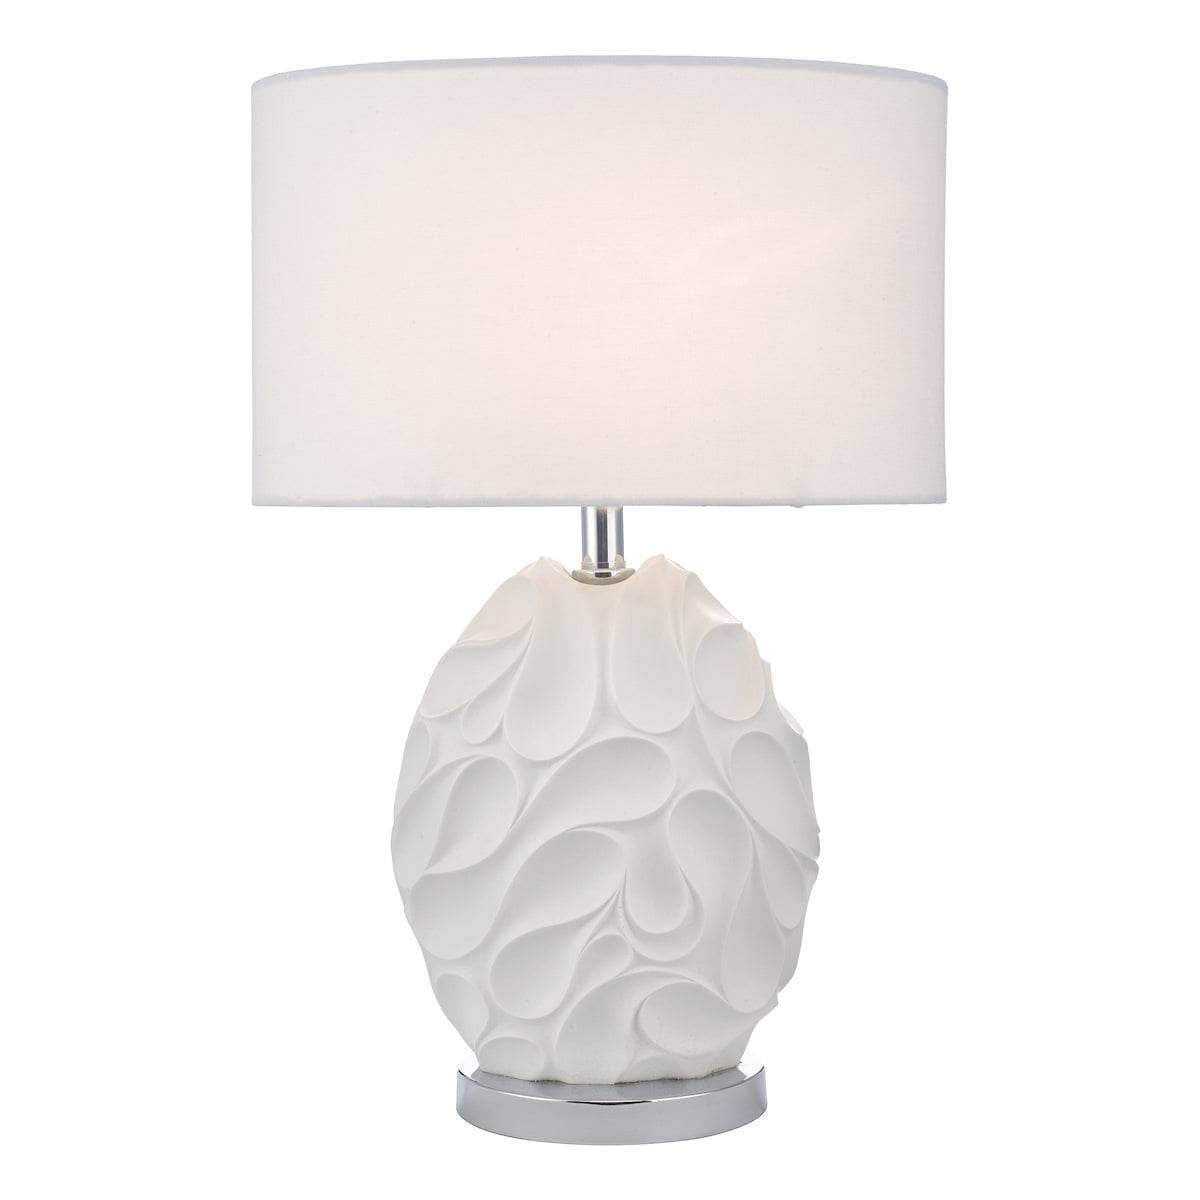 Lights  -  Zachary Table Lamp White Oval Complete With Shade  -  50142073